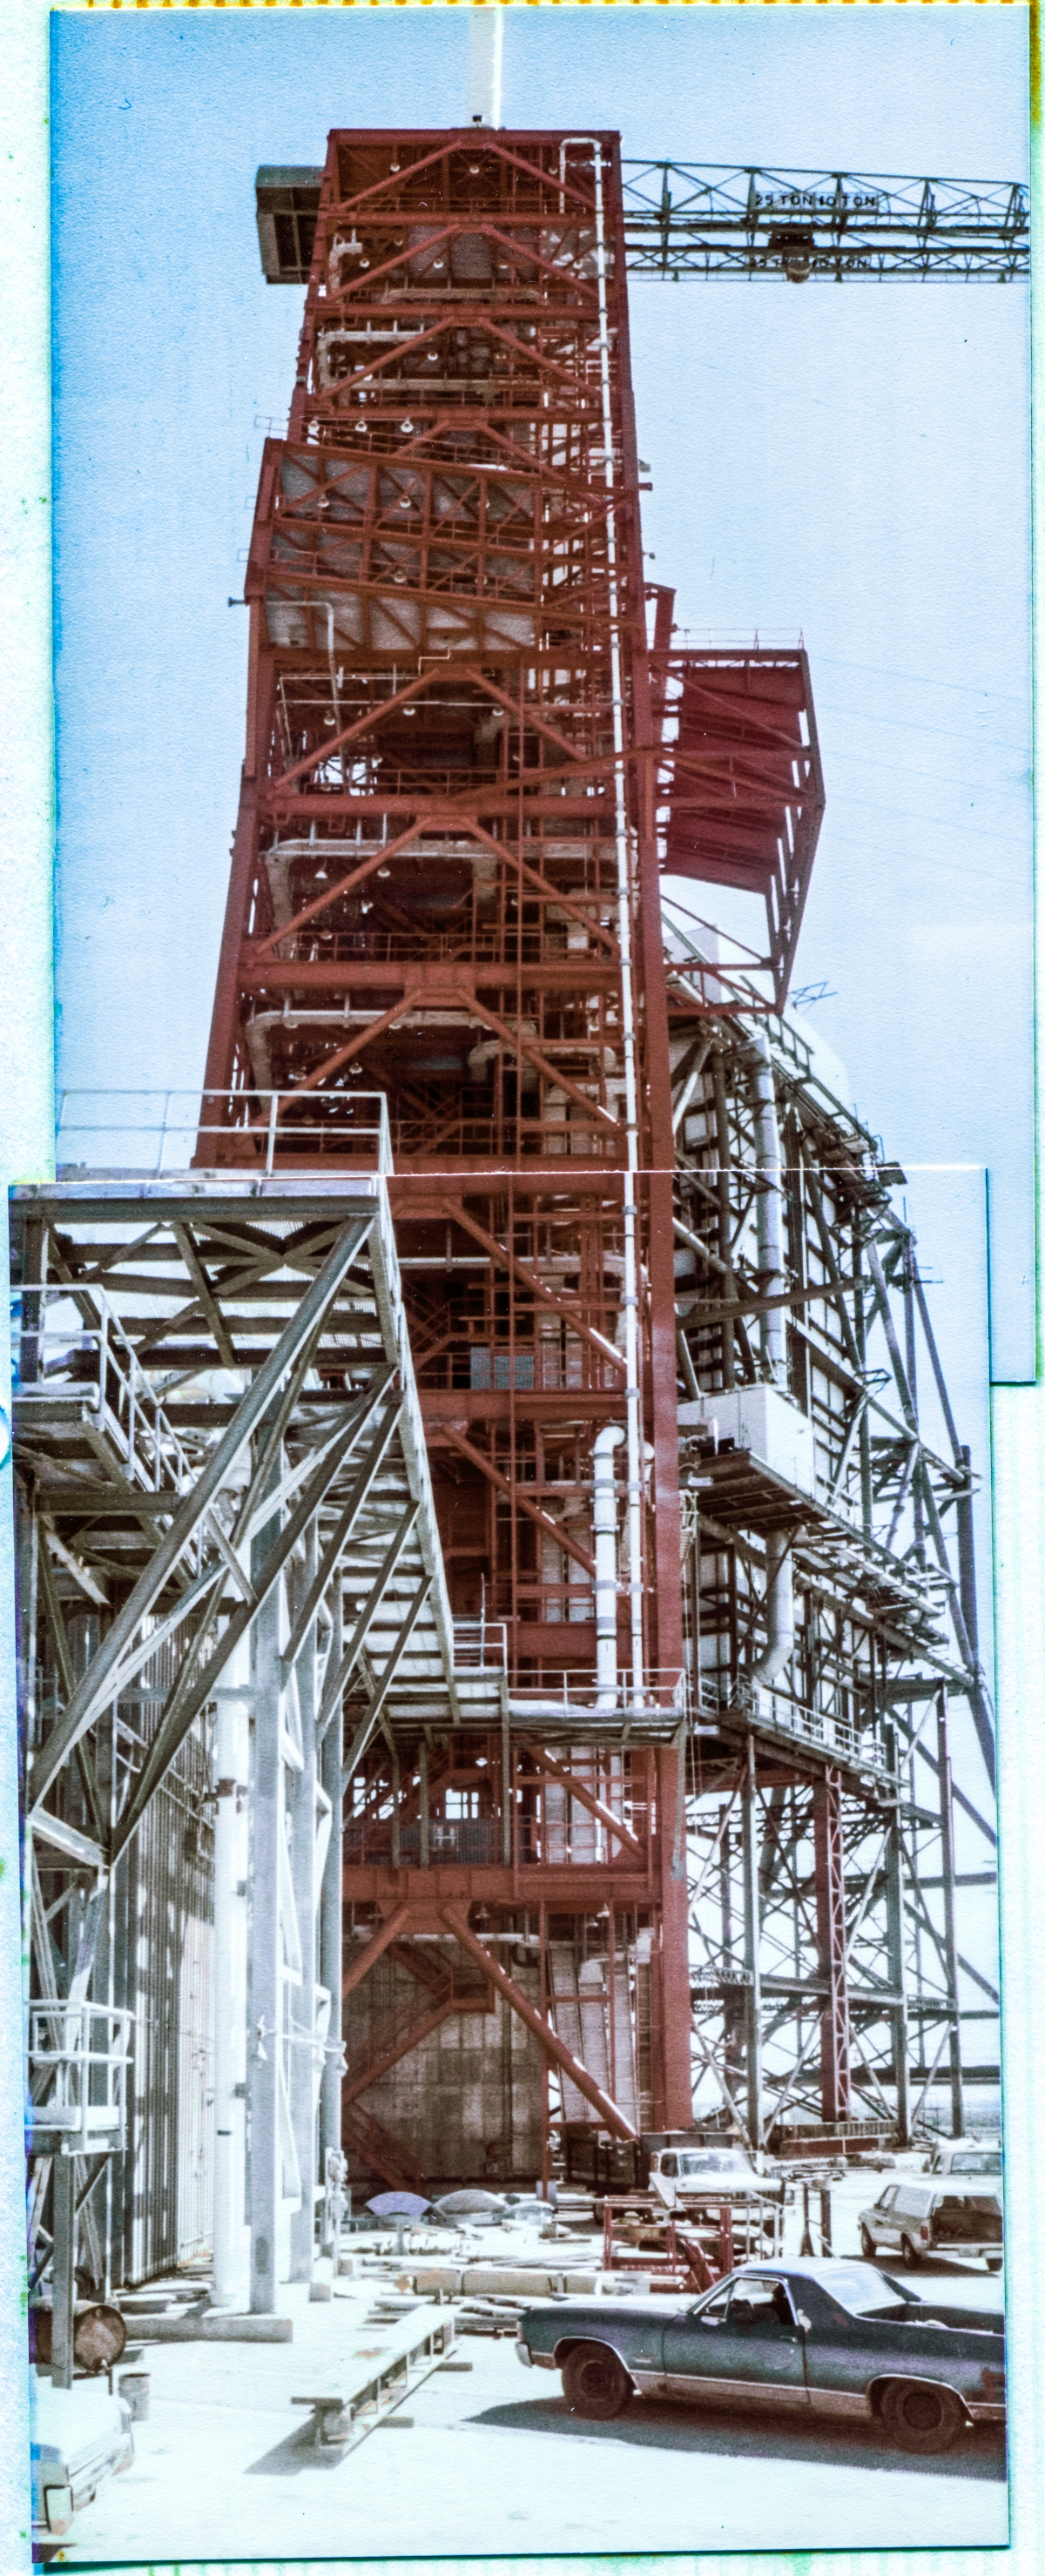 Image 013. The Fixed Service Structure at Space Shuttle Launch Complex 39-B, Kennedy Space Center, Florida, towers into the sky above you, viewed from due north of it, nearby, on the Pad Deck. The FSS was created by reusing most of the Launch Umbilical Tower from Mobile Launcher 3, which was originally built to service Saturn V’s as part of the Apollo Program. In this photomontage, taken during the early phases of the Space Shuttle modifications to Pad B, the FSS retains its original red paint job, prior to it being sandblasted and repainted gray, which color it retained for the duration of the Space Shuttle Program. Photo by James MacLaren.